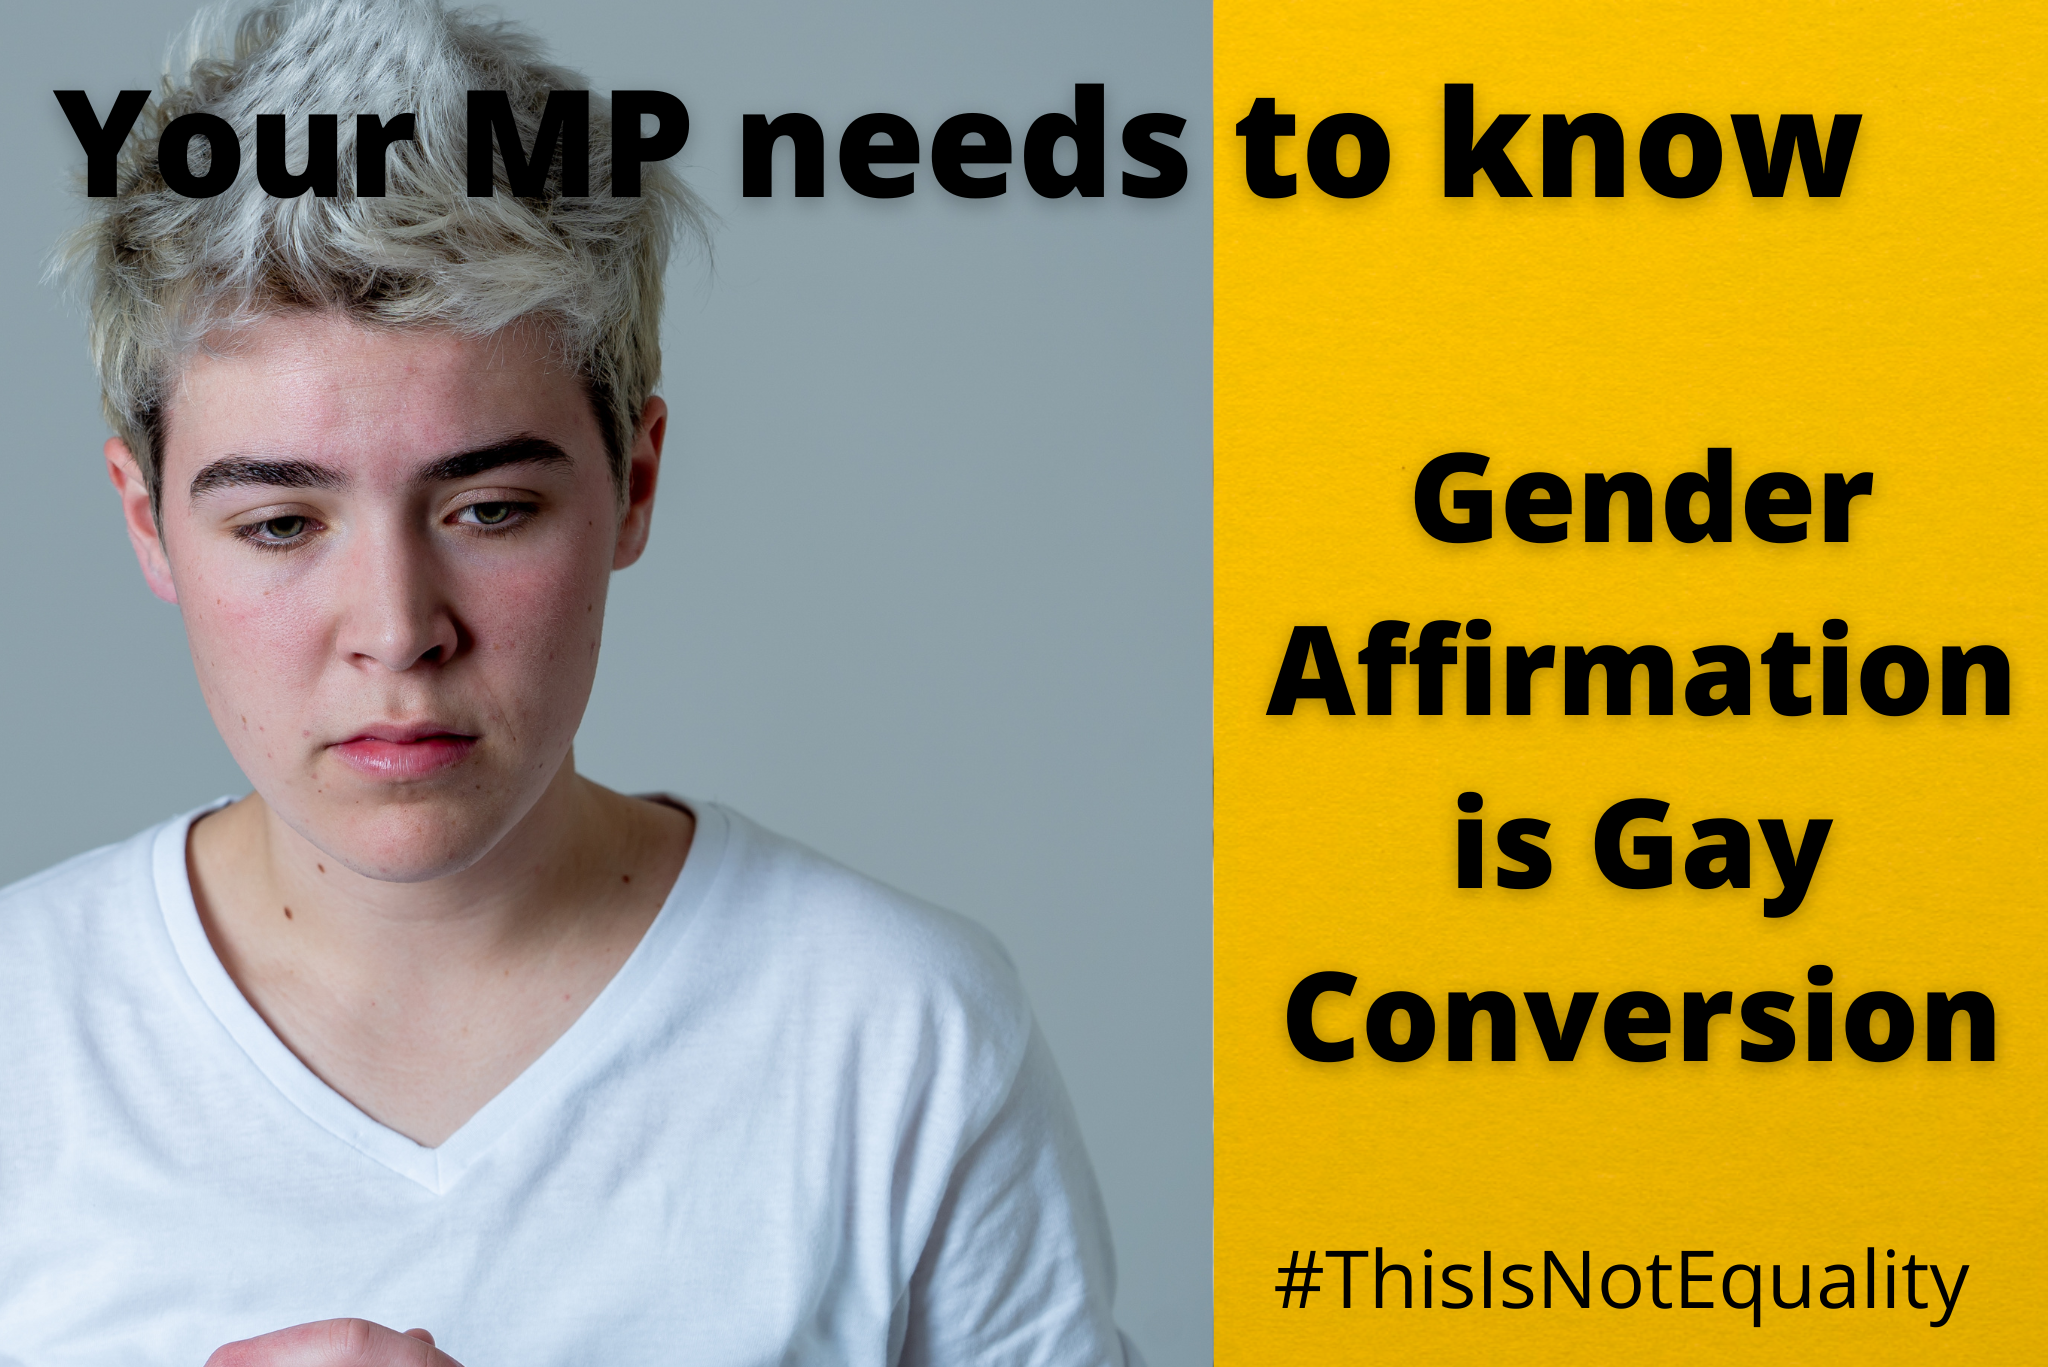 Tell your MP: Gender Identity Affirmation is Gay Conversion